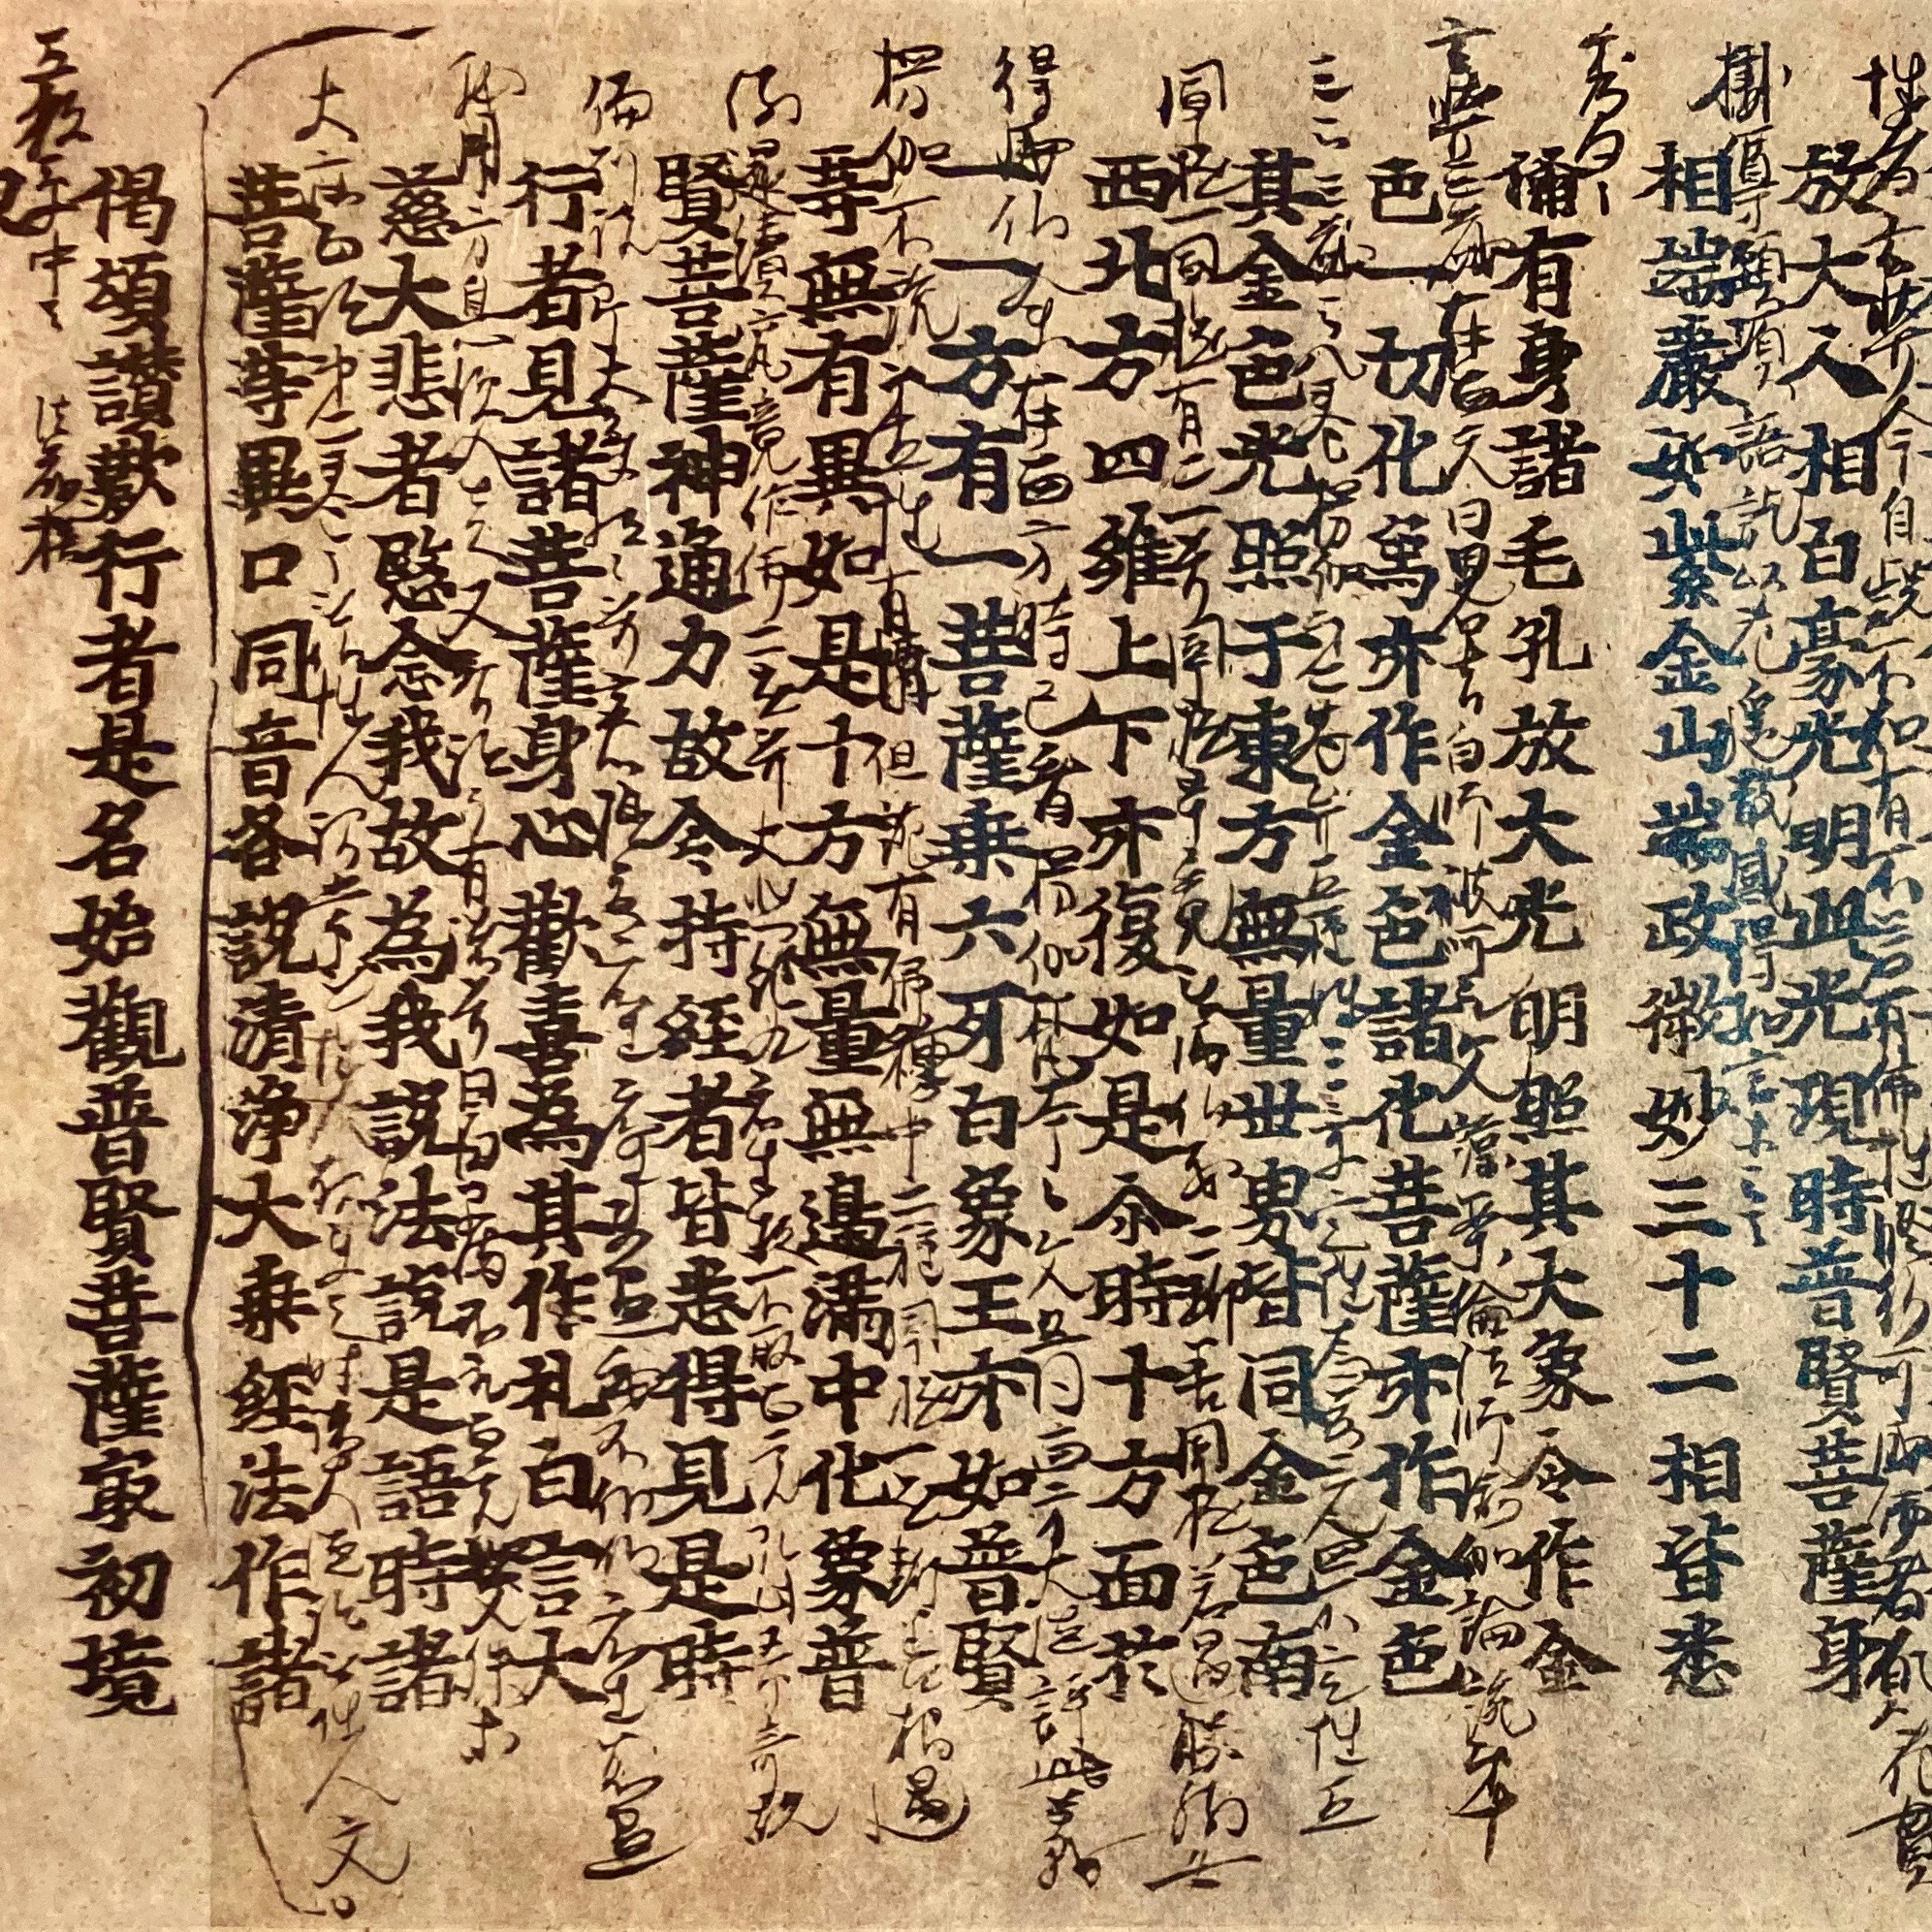 A Sutra as a Notebook? Printing and Repurposing Scriptures in Medieval Japan